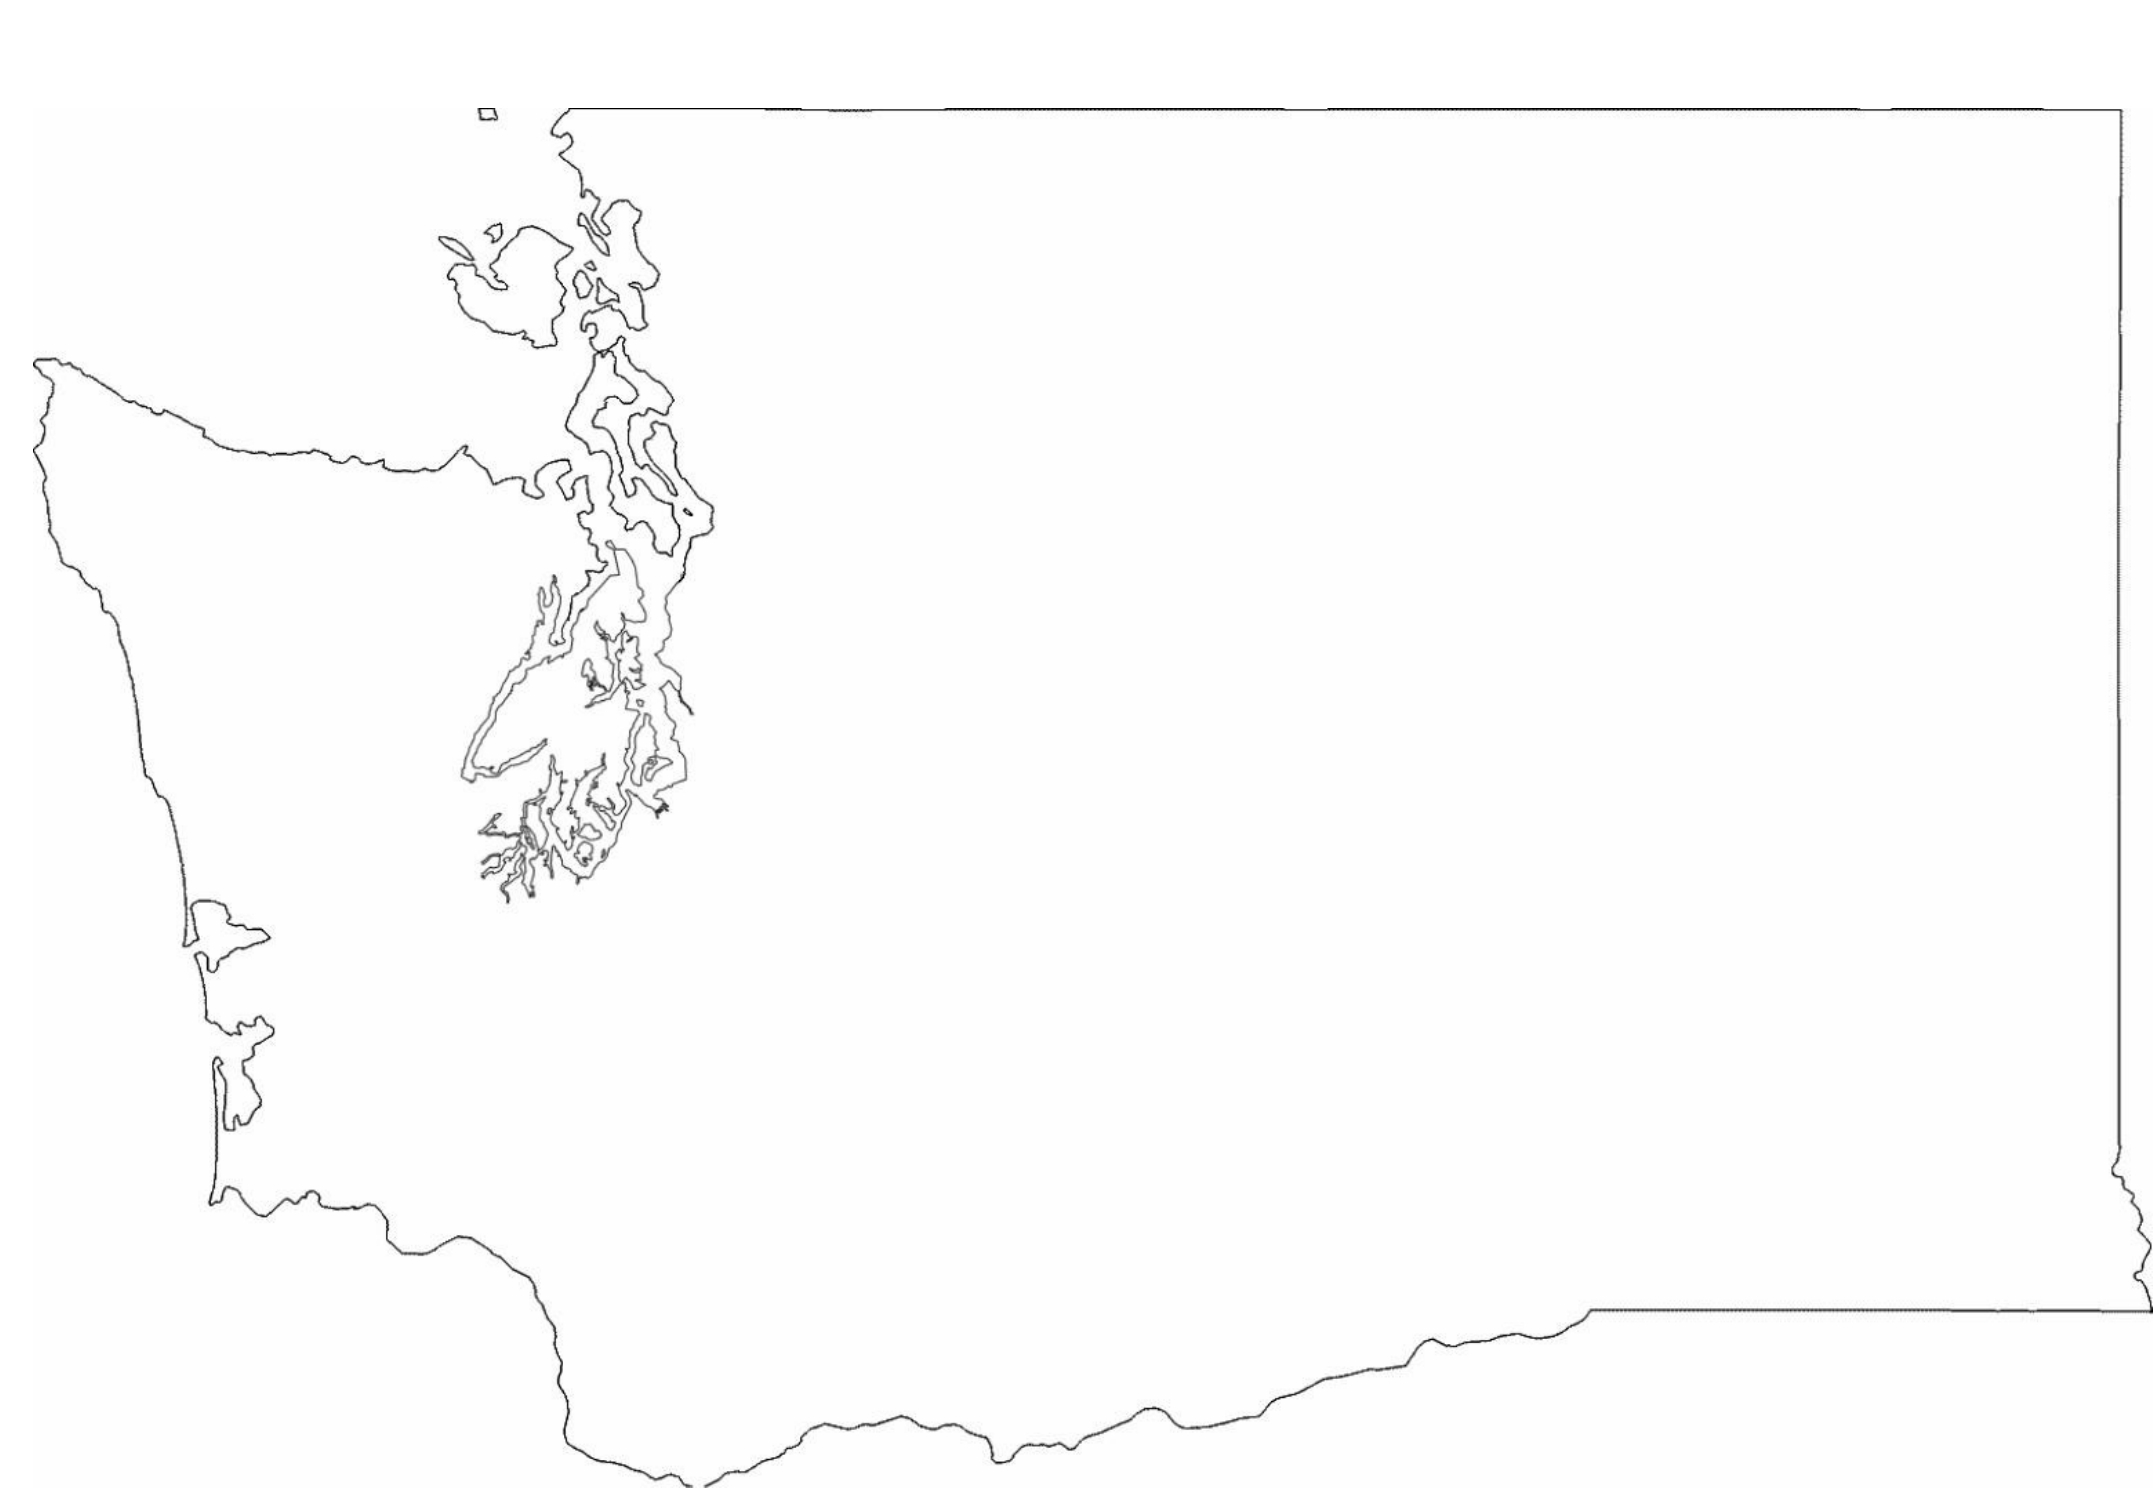 Washington State Outline Map Free Download - Free Printable Map Of Washington State